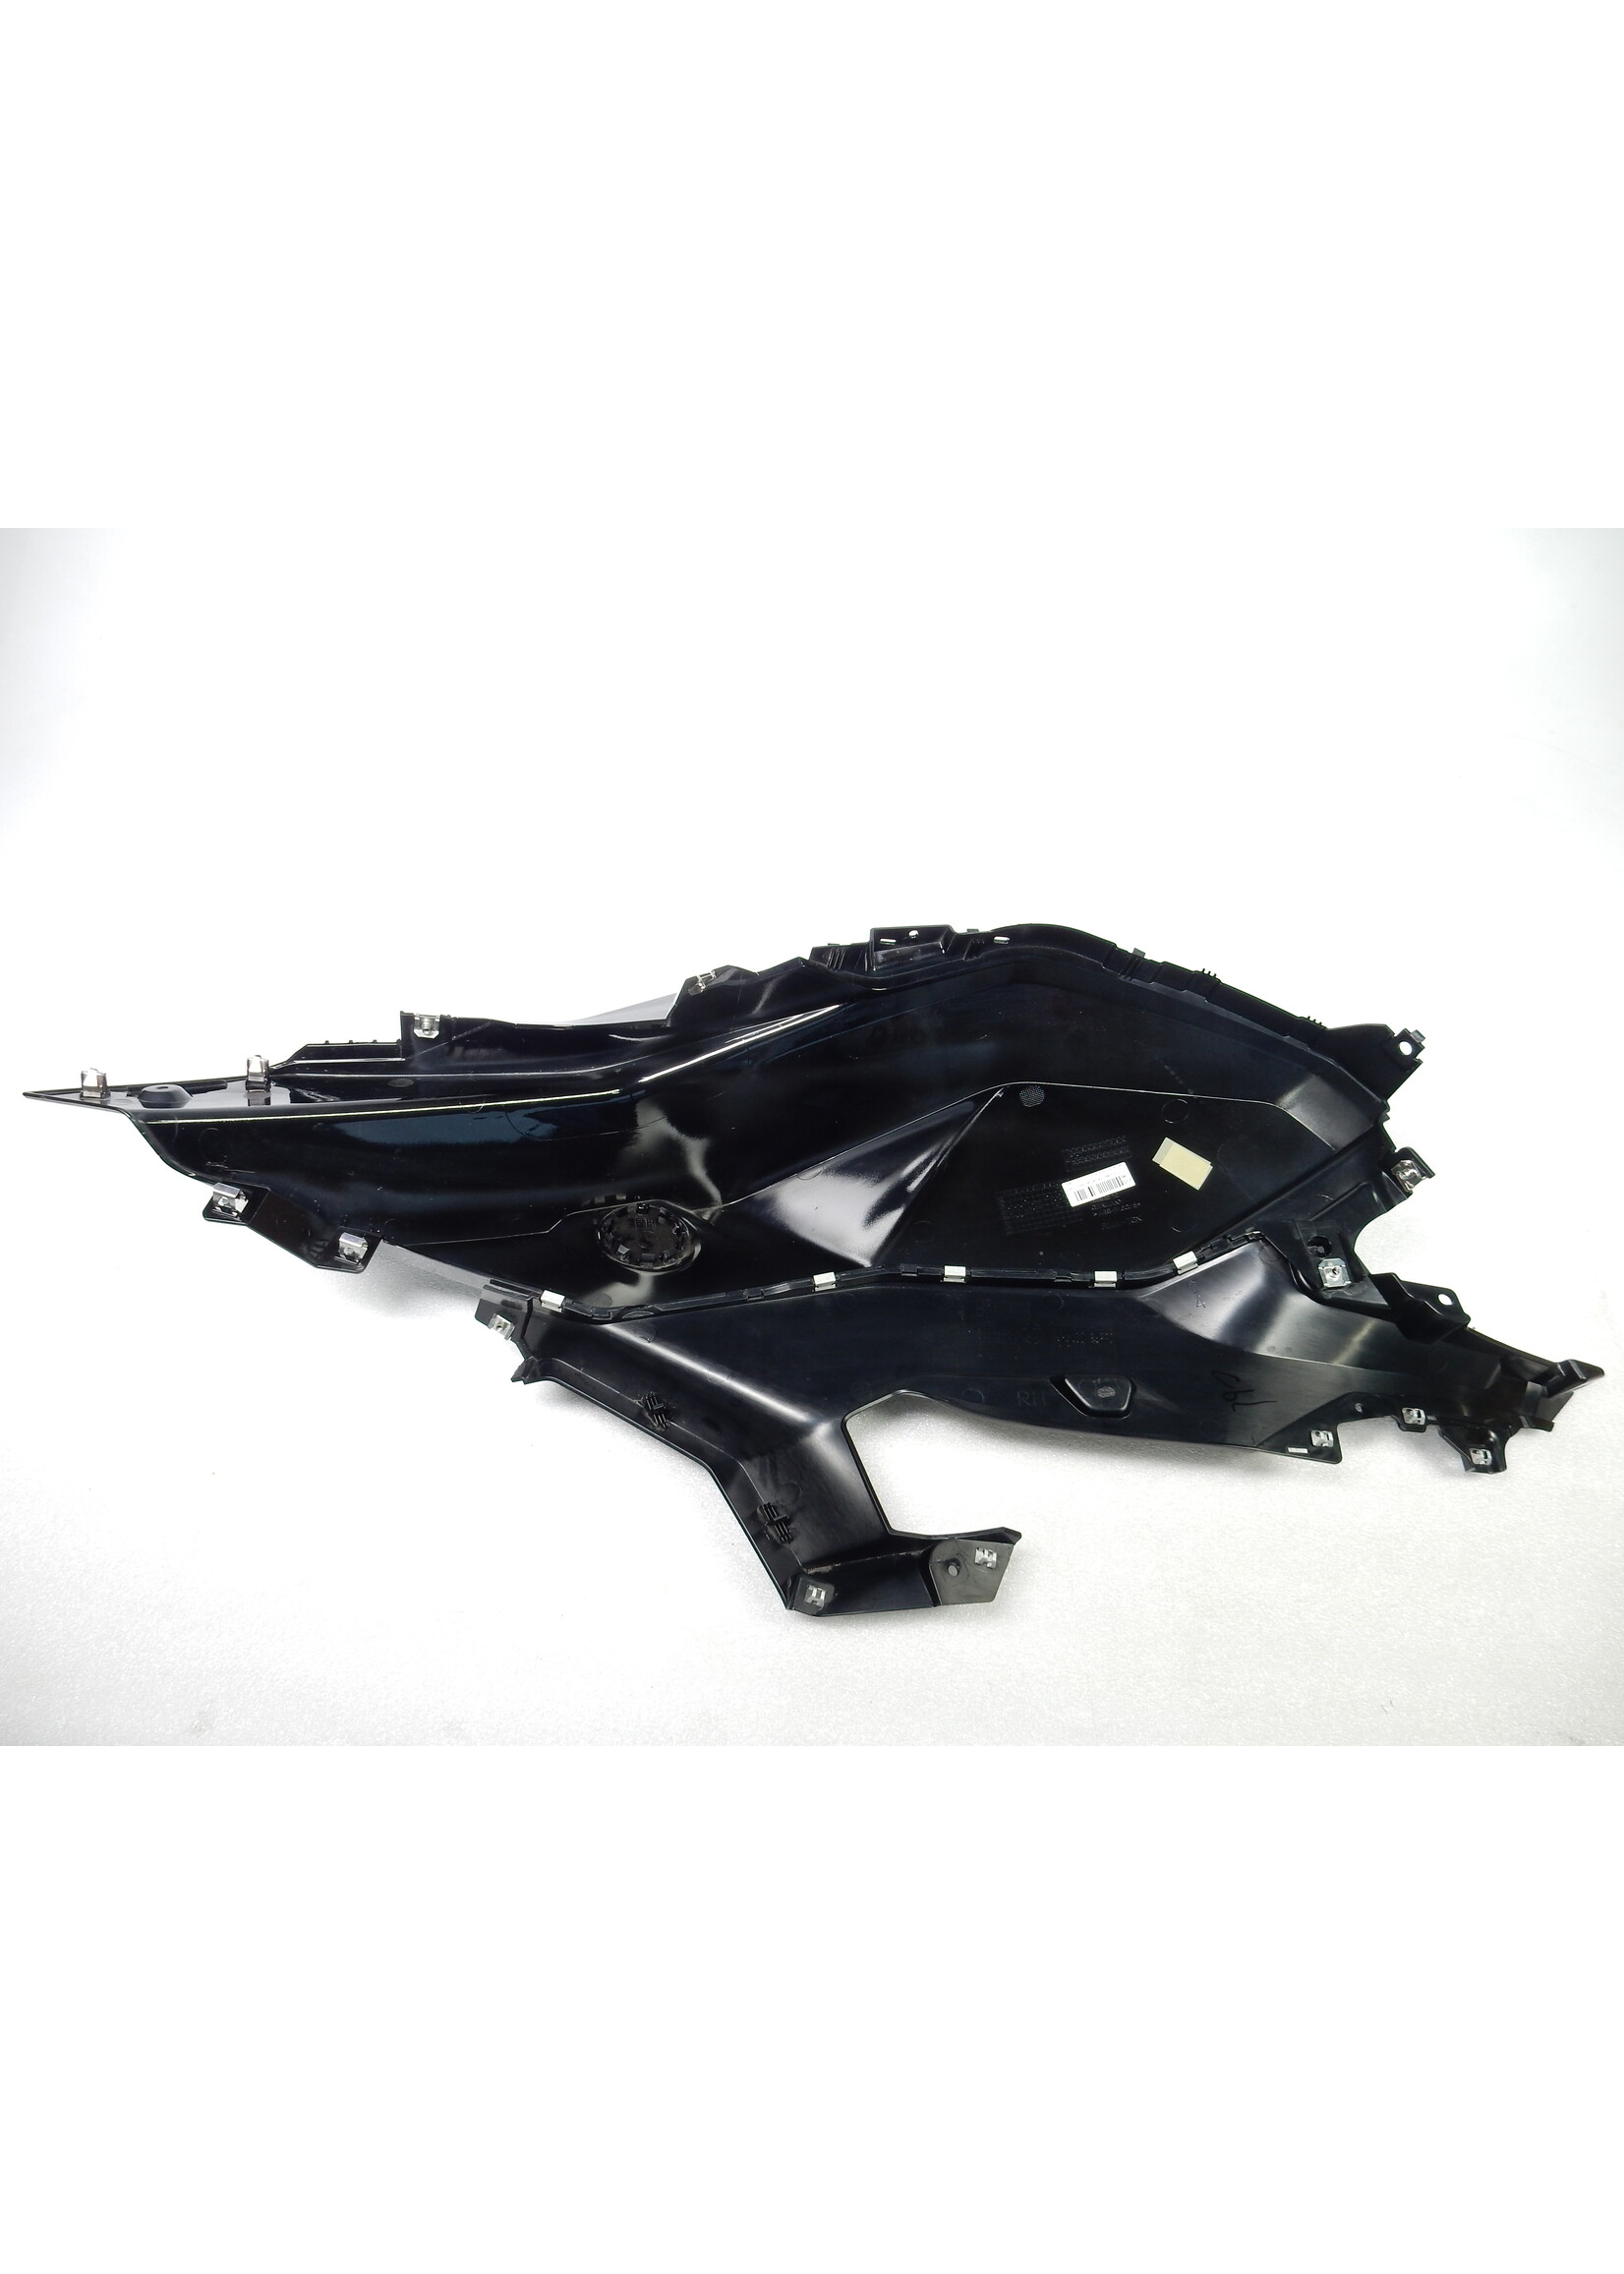 BMW BMW F 900 XR Tank cover right bottom / Fairing side panel, right Tape on clear coat BLACK STORM / 46638403902 / 46638403894 / 46638358168